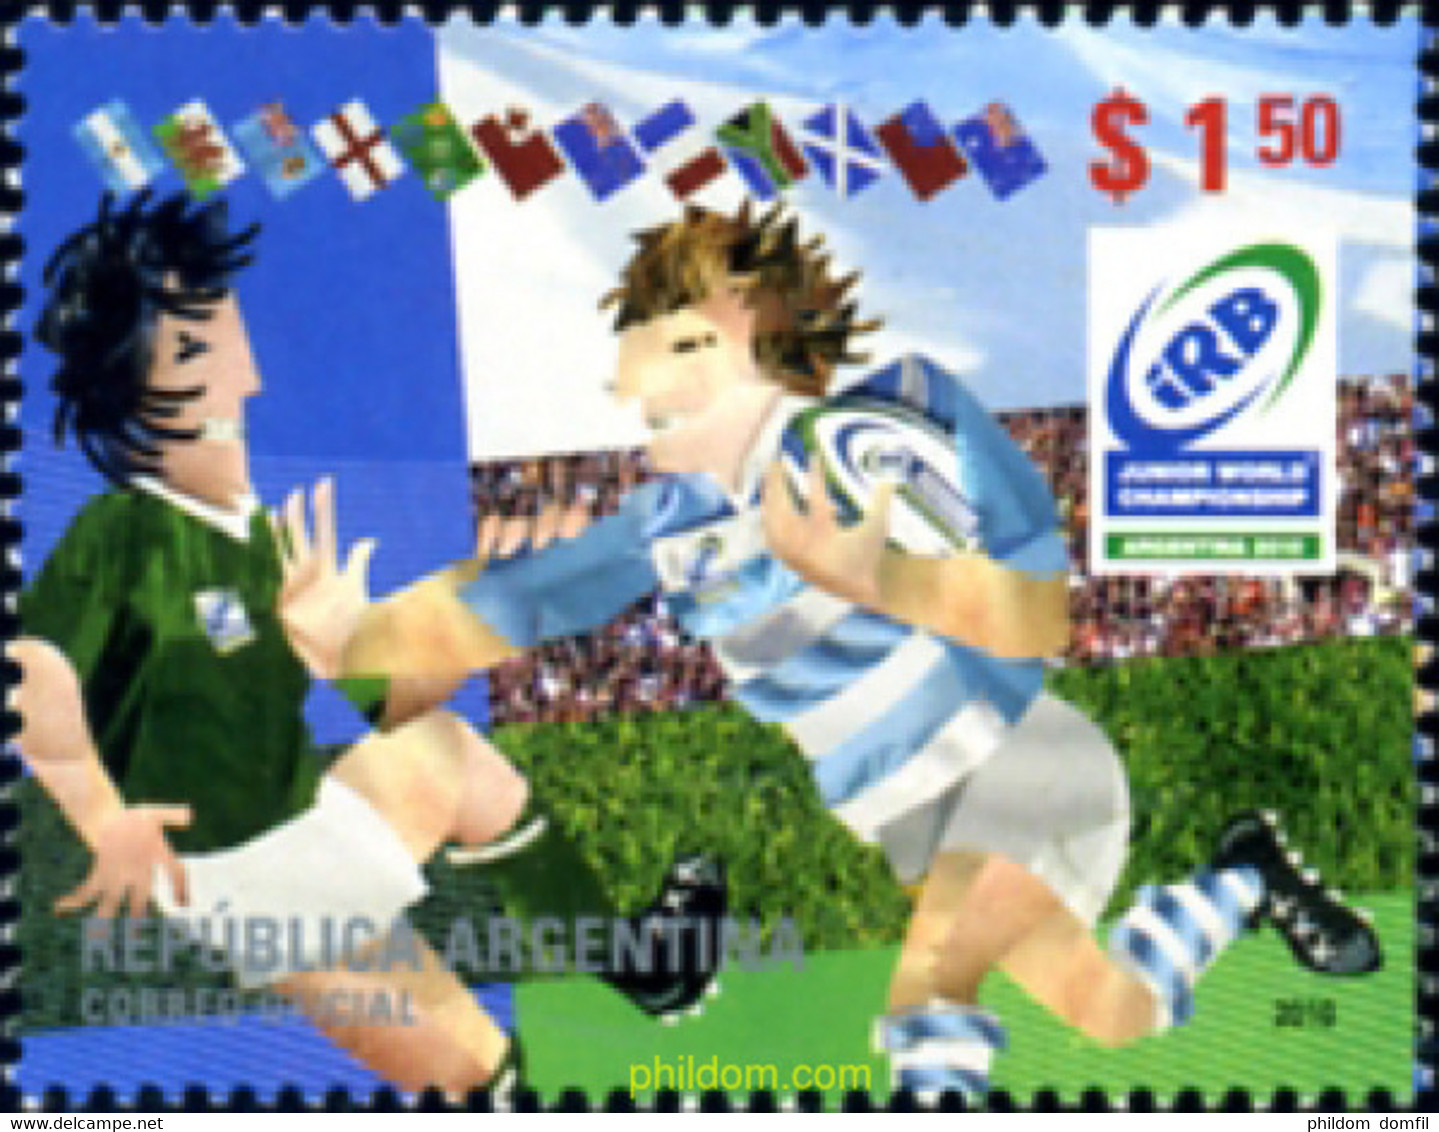 252494 MNH ARGENTINA 2010 CAMPEONATO DEL MUNDO DE RUGBY - Used Stamps